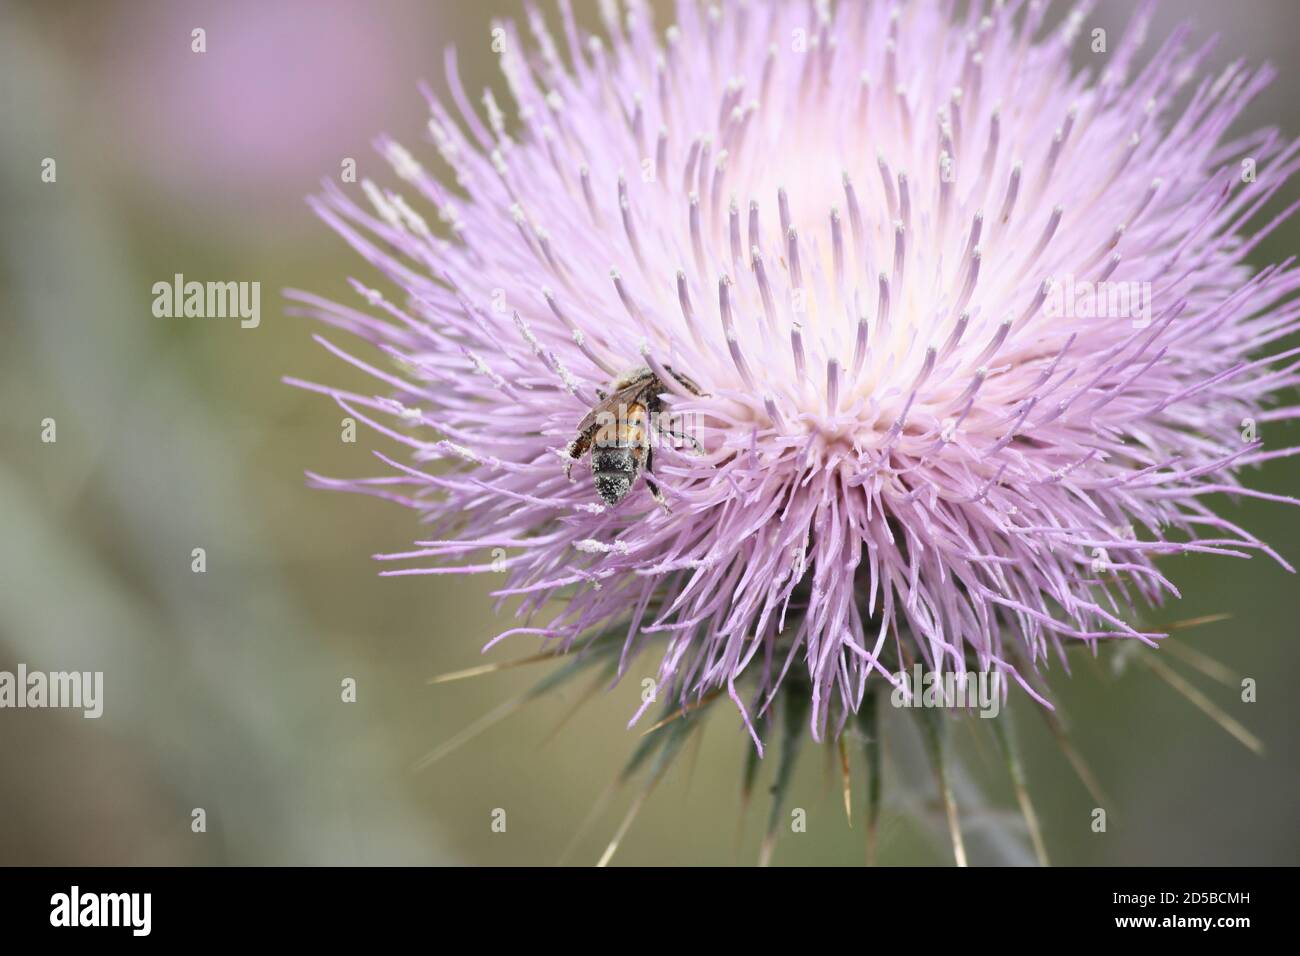 Happiness is this bee covered in dusty white pollen on top of pastel colored thistle flower Stock Photo